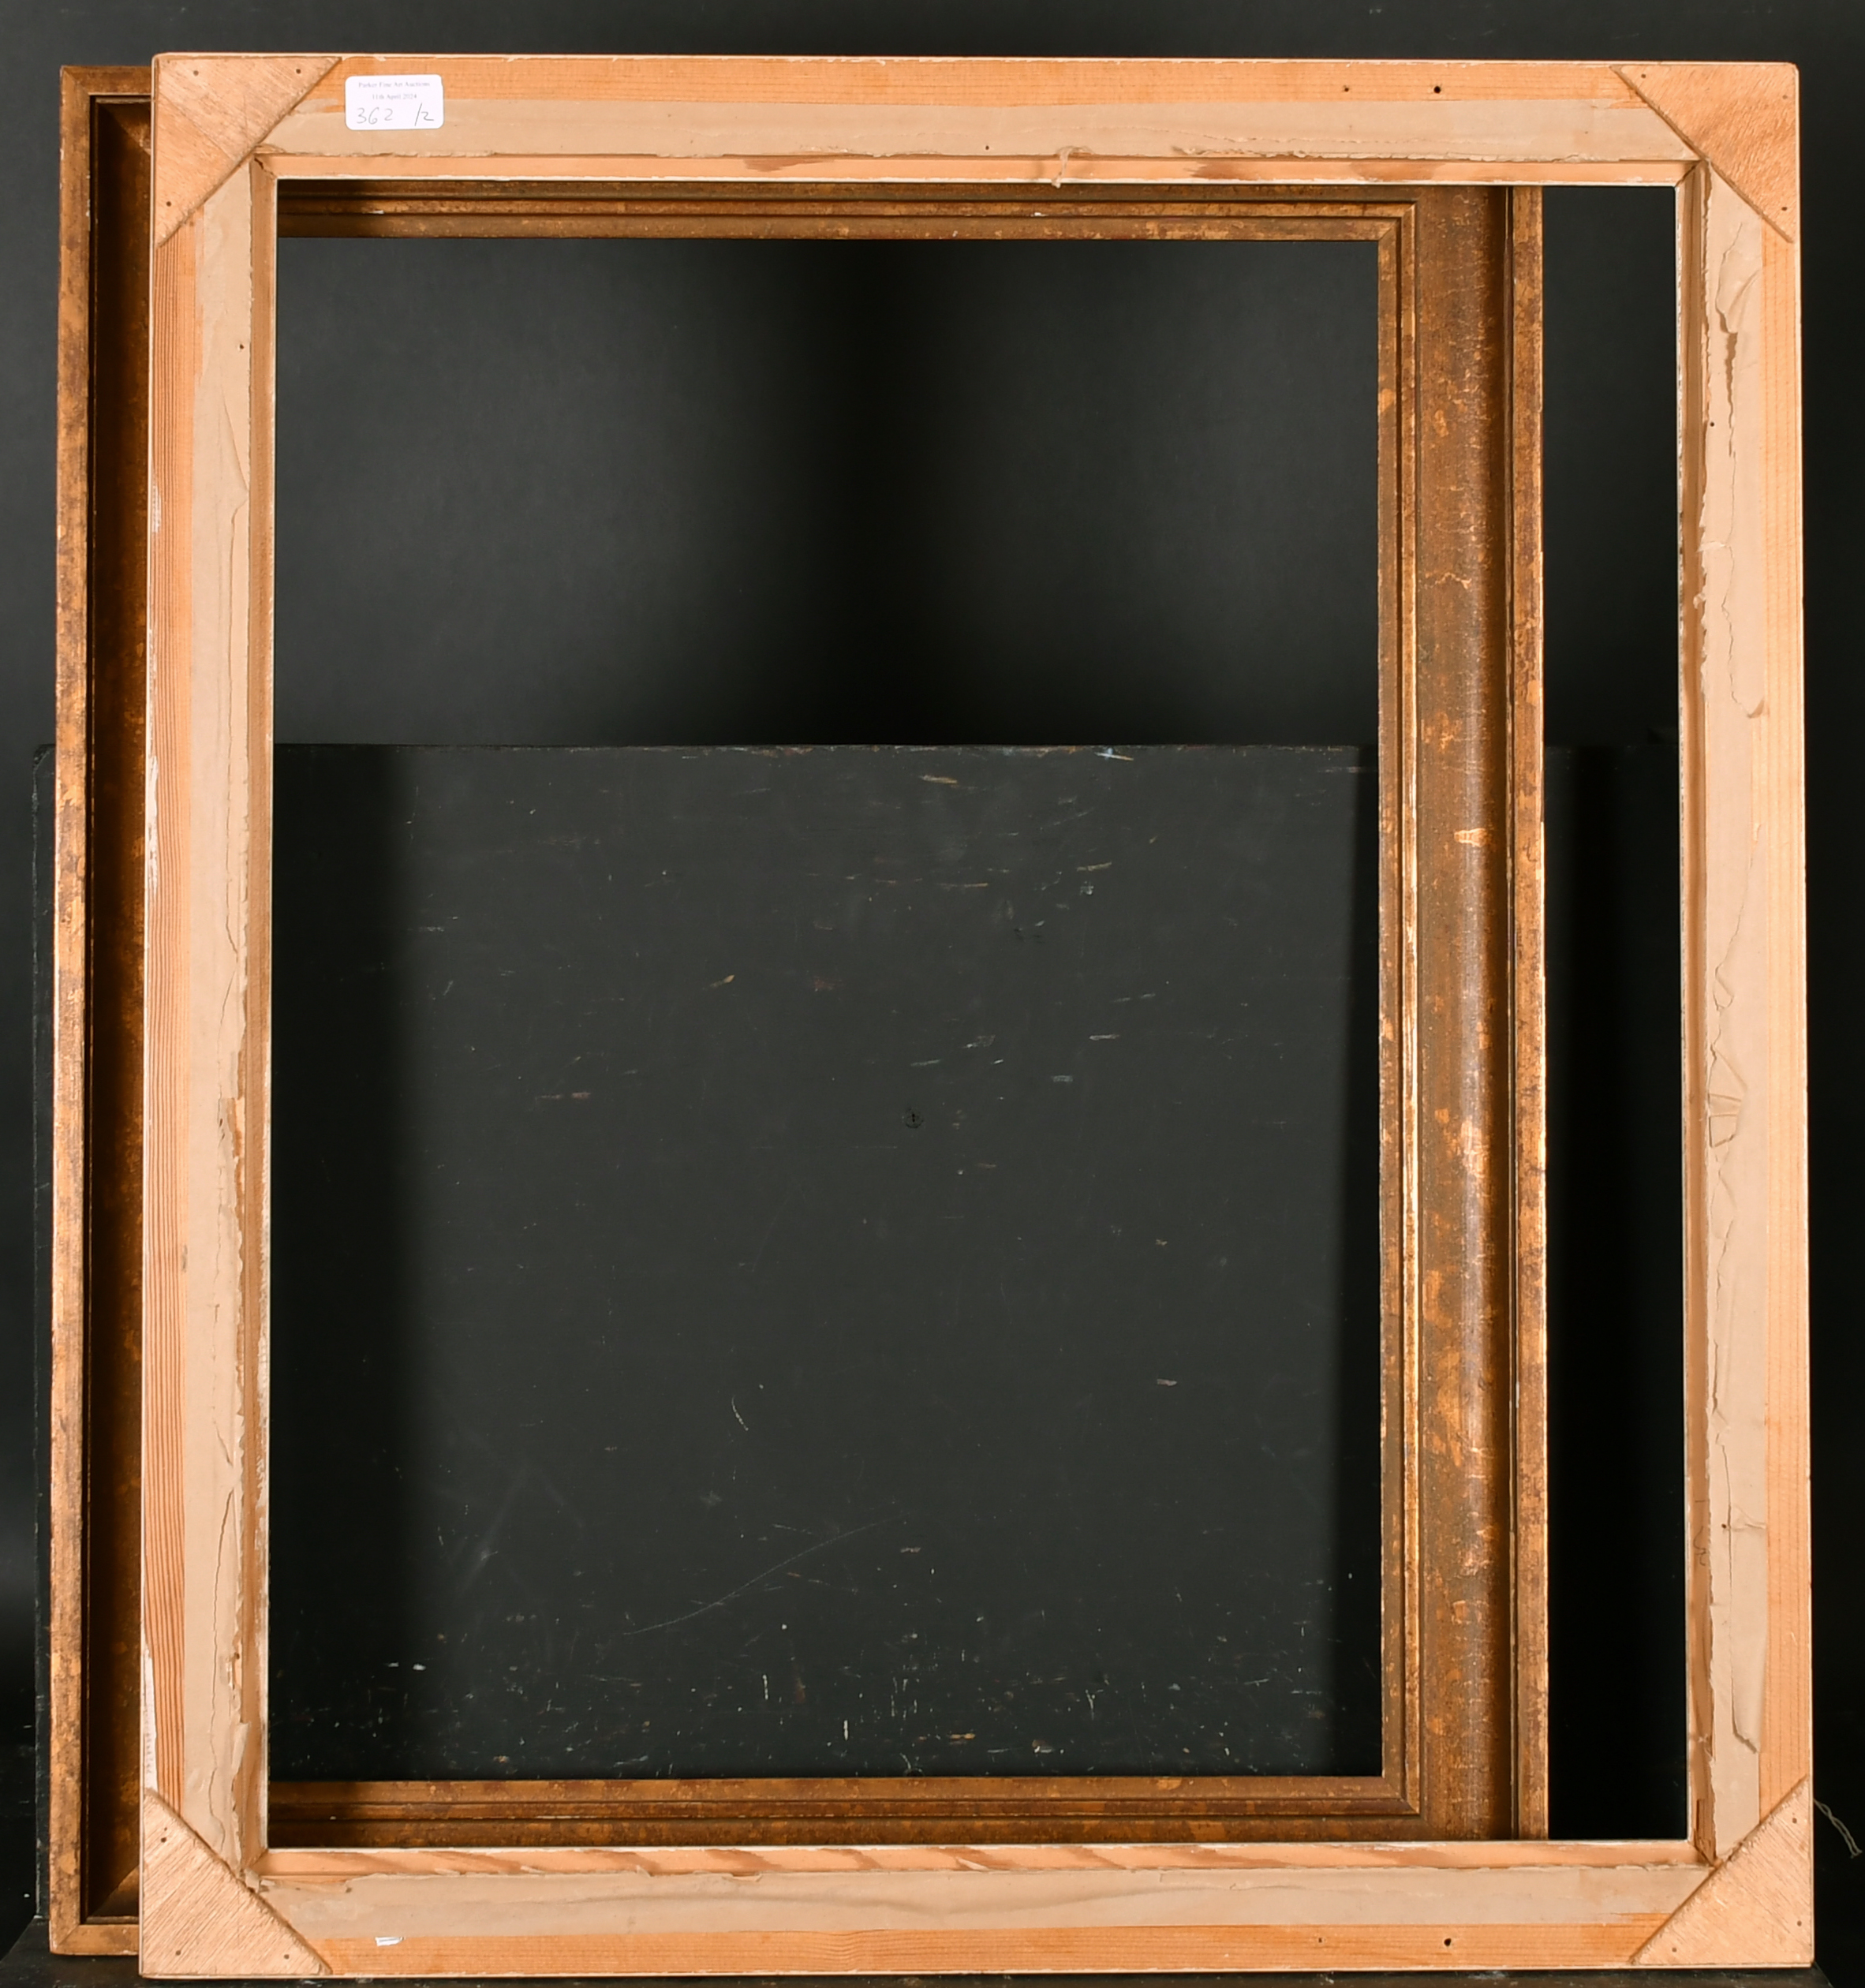 Early 20th Century European School. A Gilt Composition Frame, rebate 25.5" x 19.25 (64.8 x 48.8cm) - Image 3 of 3